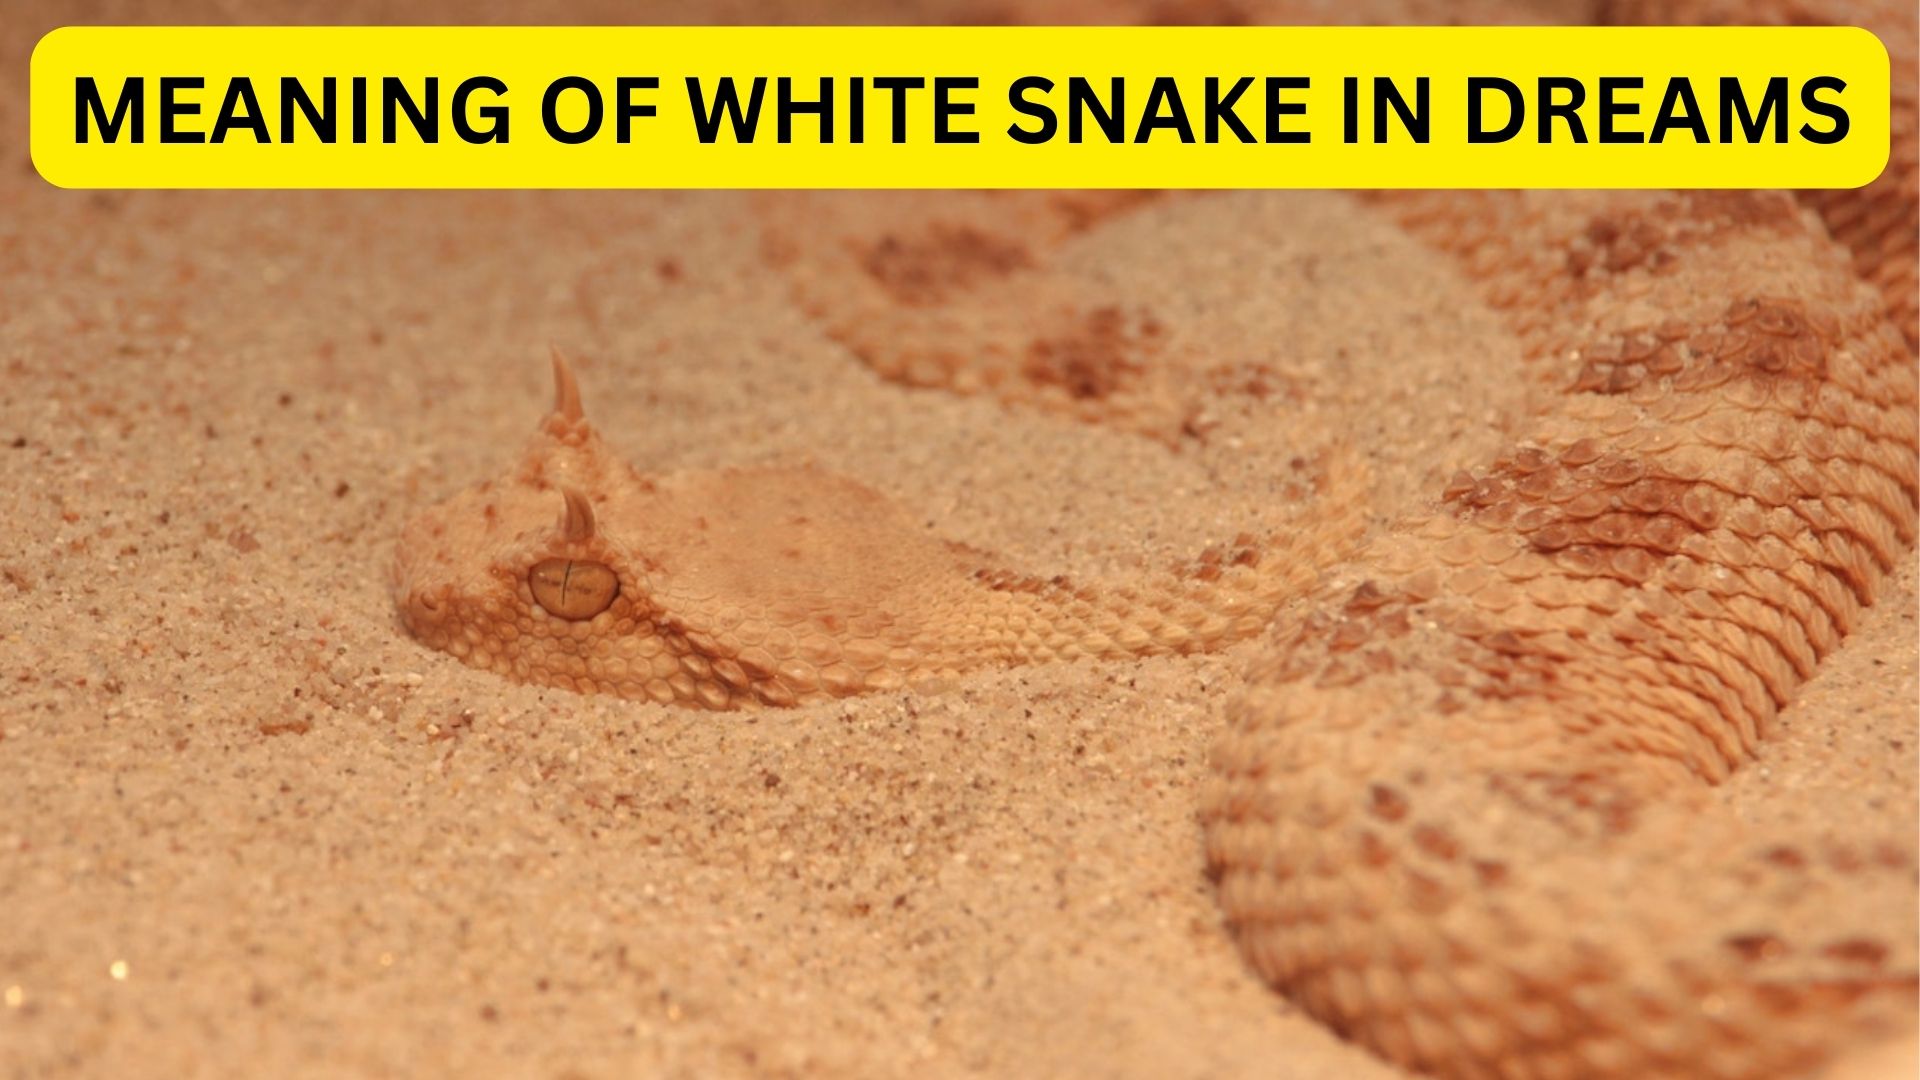 Meaning Of White Snake In Dreams - It Represents Purity, Good Energy, And New Beginnings